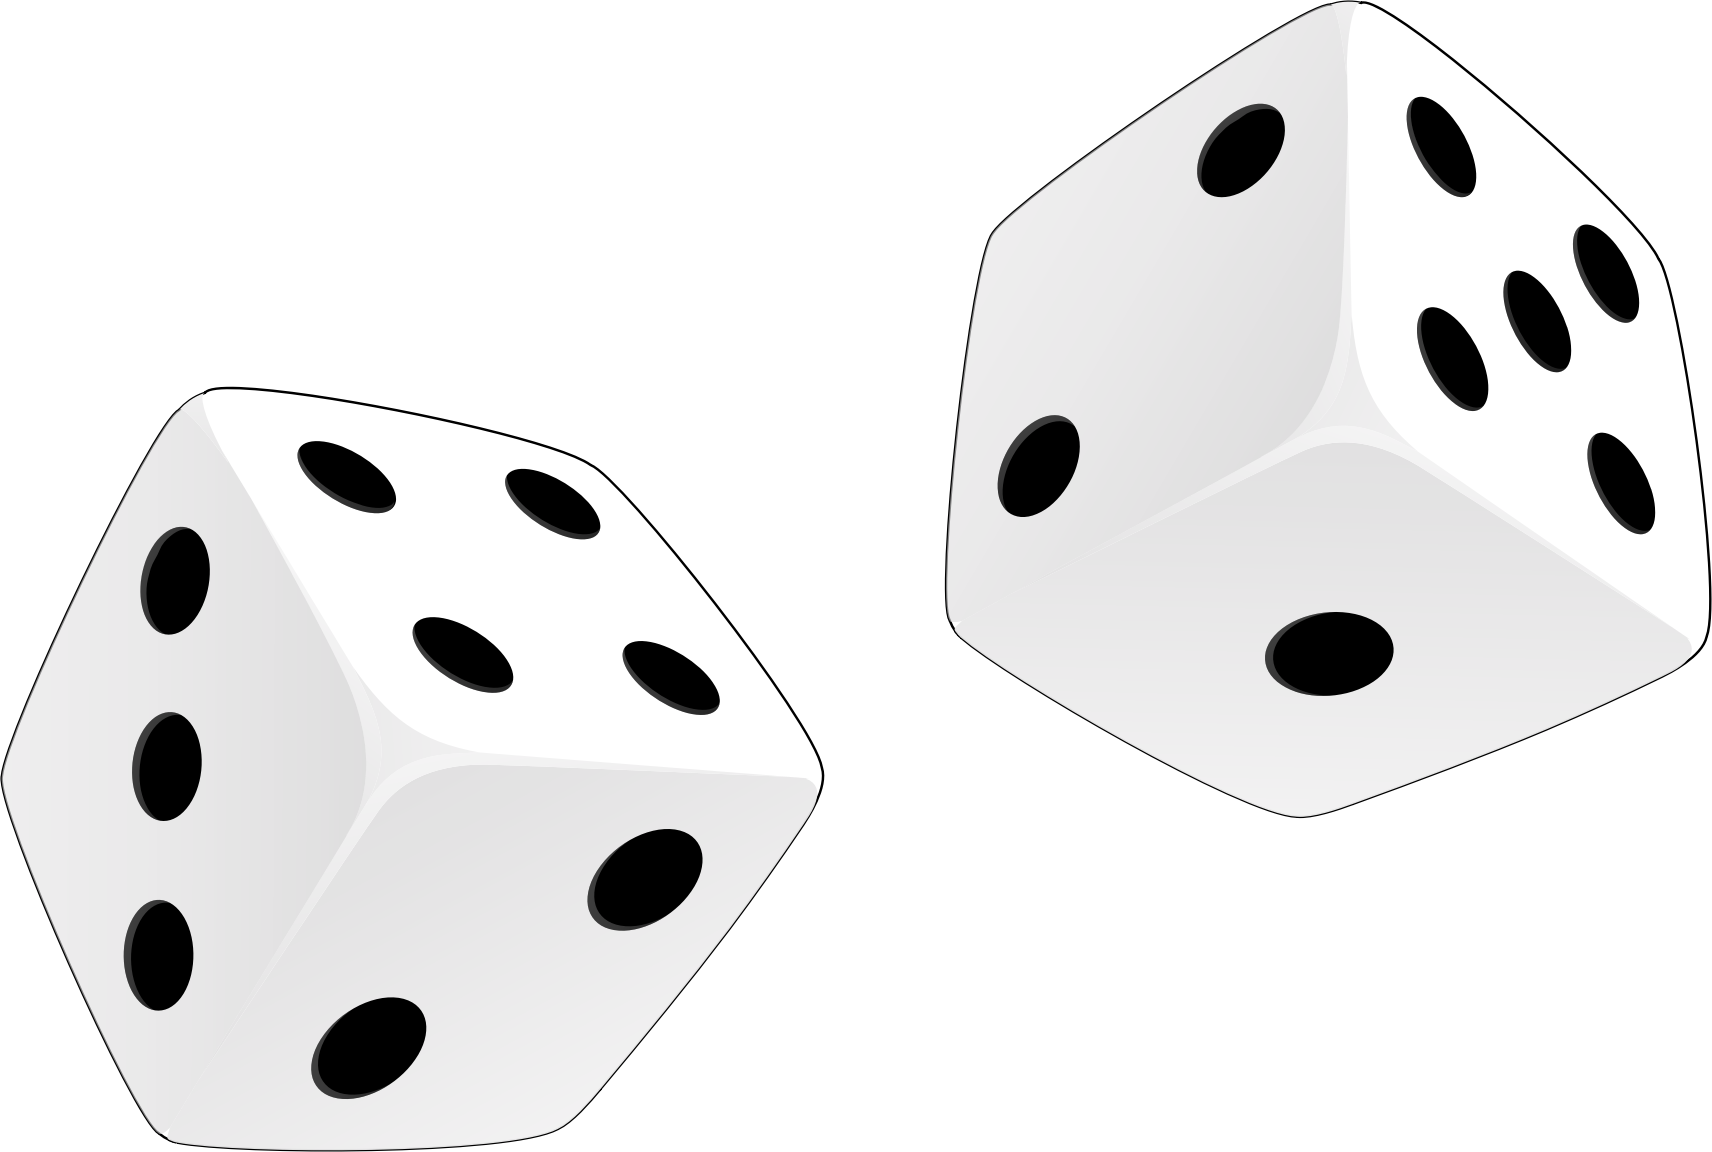 clipart of dice - photo #41